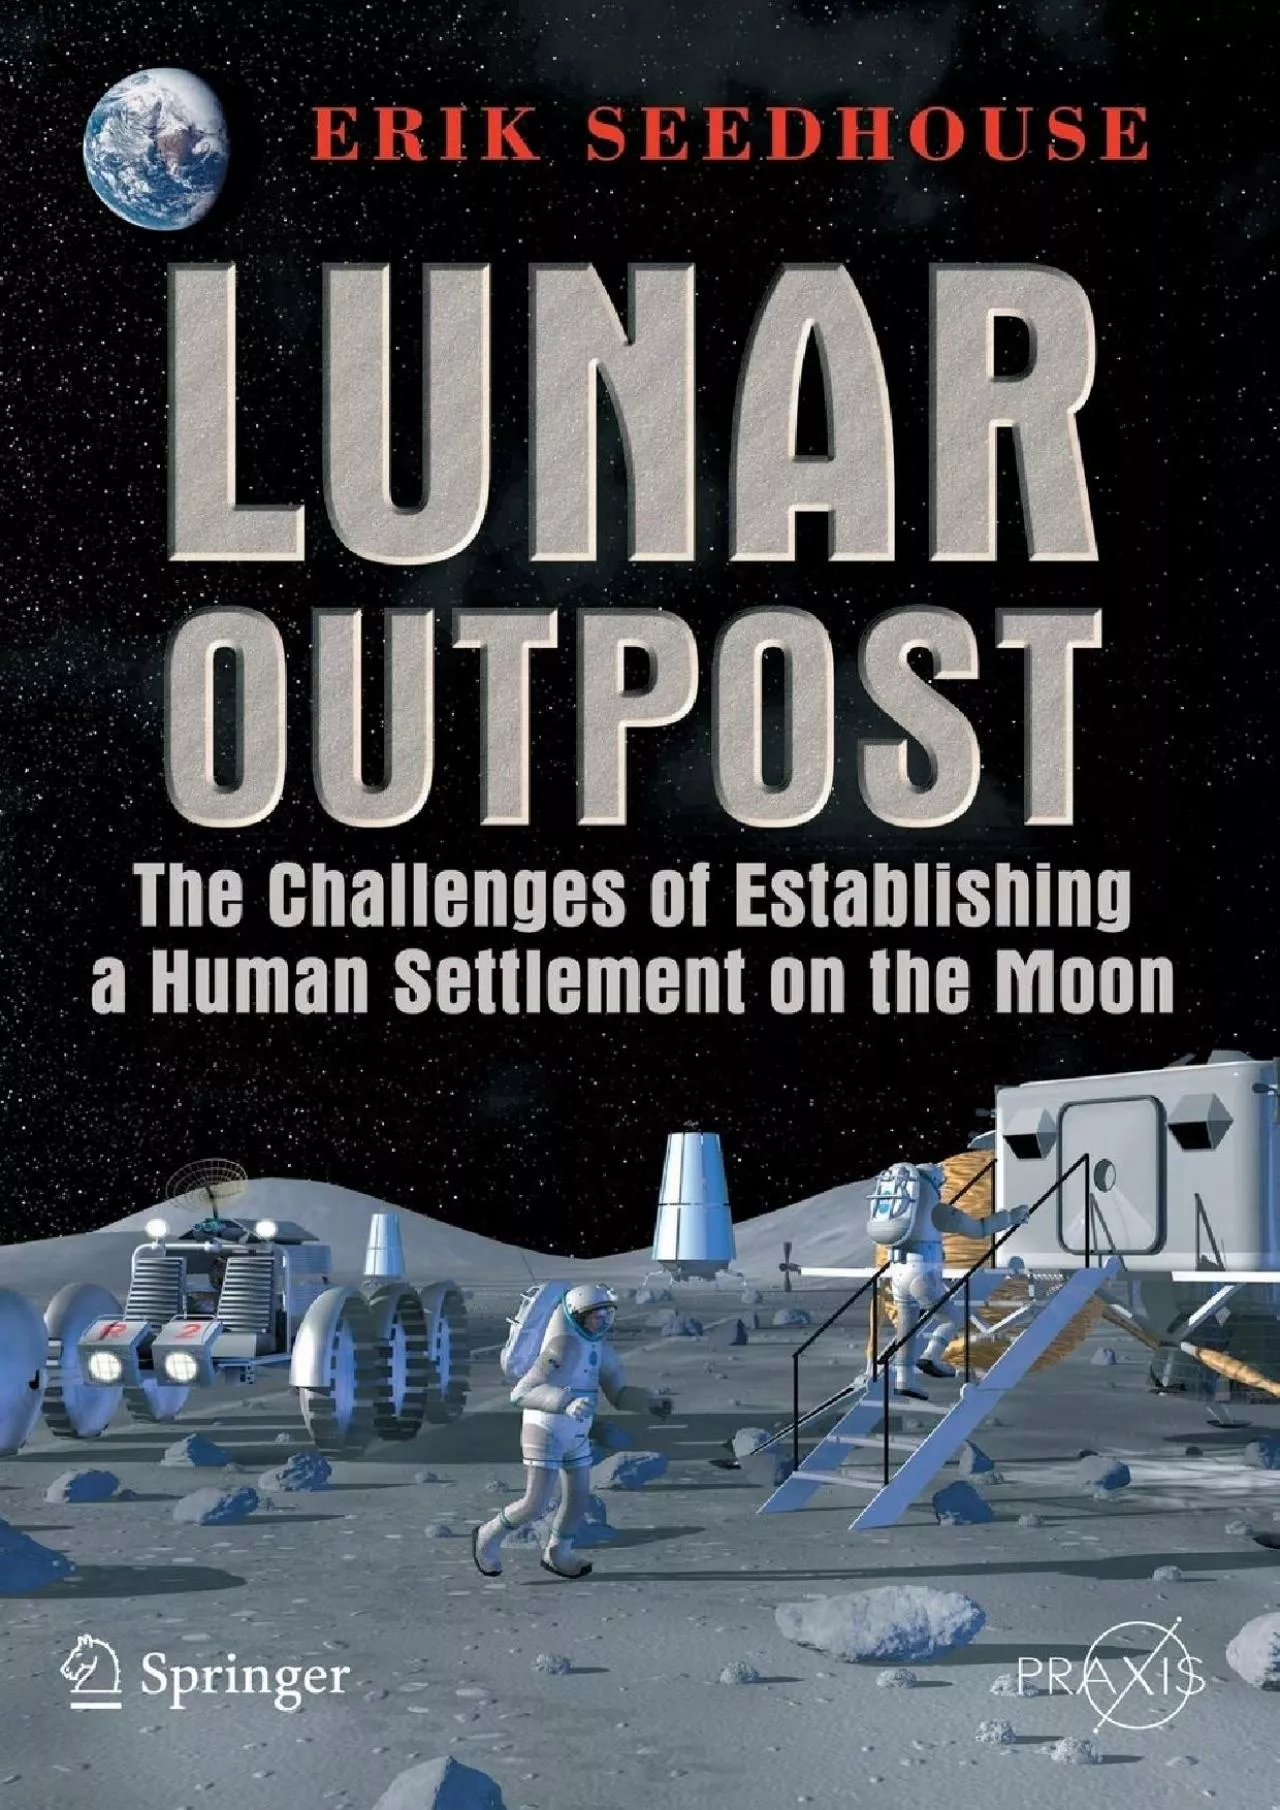 (BOOS)-Lunar Outpost: The Challenges of Establishing a Human Settlement on the Moon (Springer